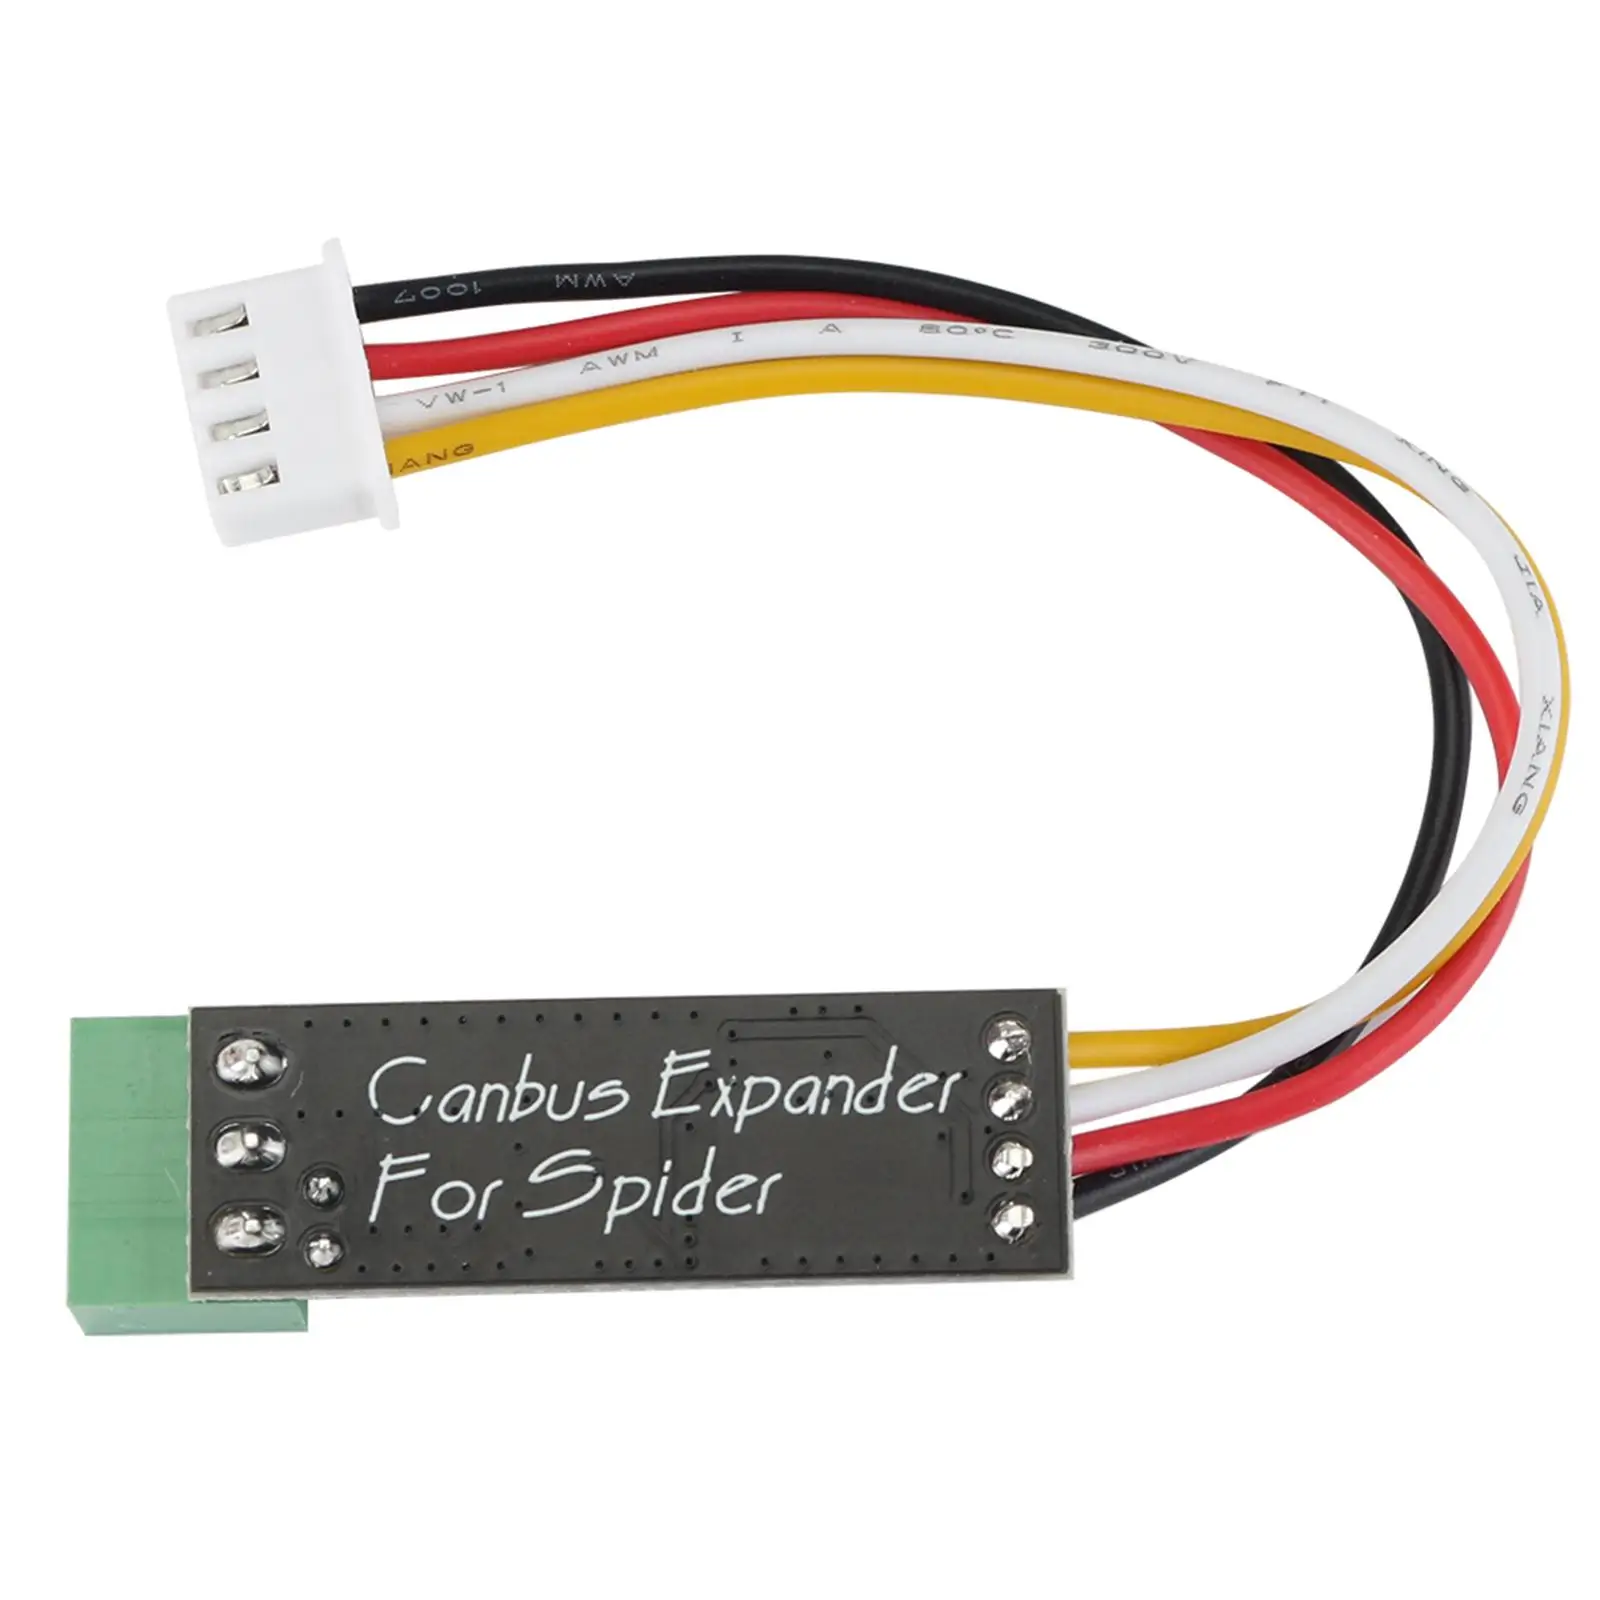 Canbus Expander Module Transceiver Replaces Durable Adapter for Spider Board